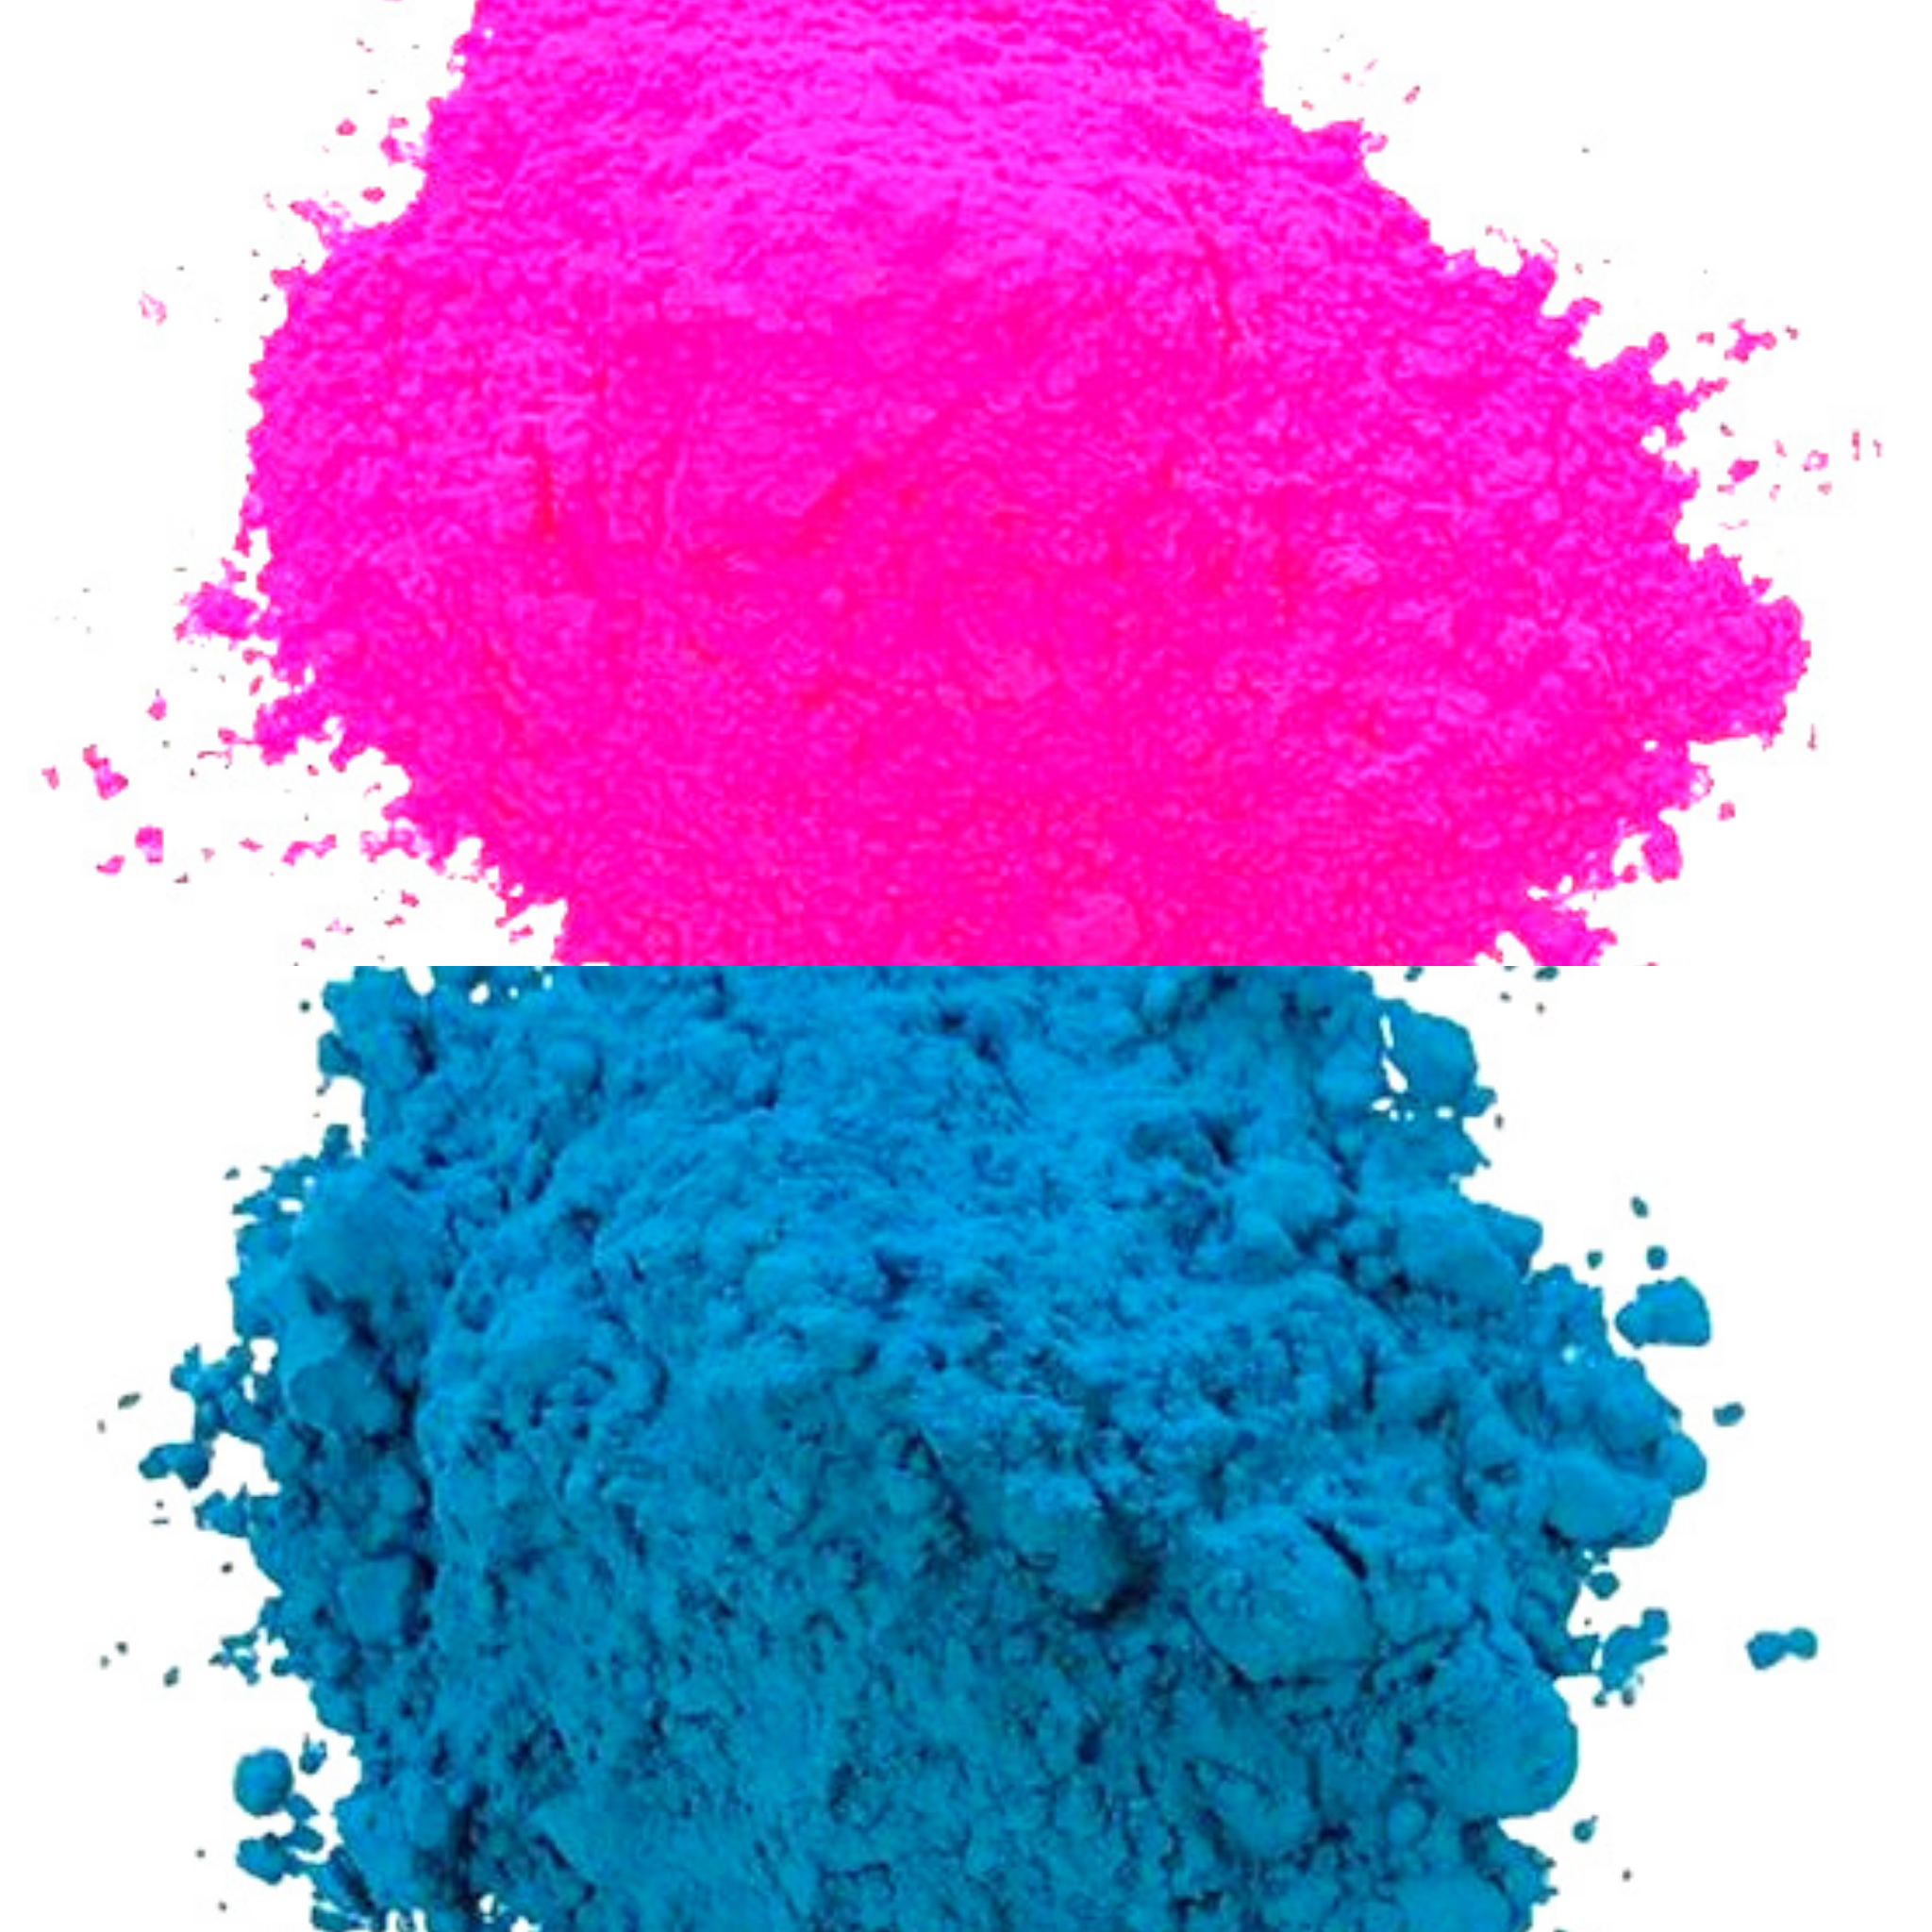 Gender Reveal Powder - 15 Pounds Pink and 15 Pounds Blue